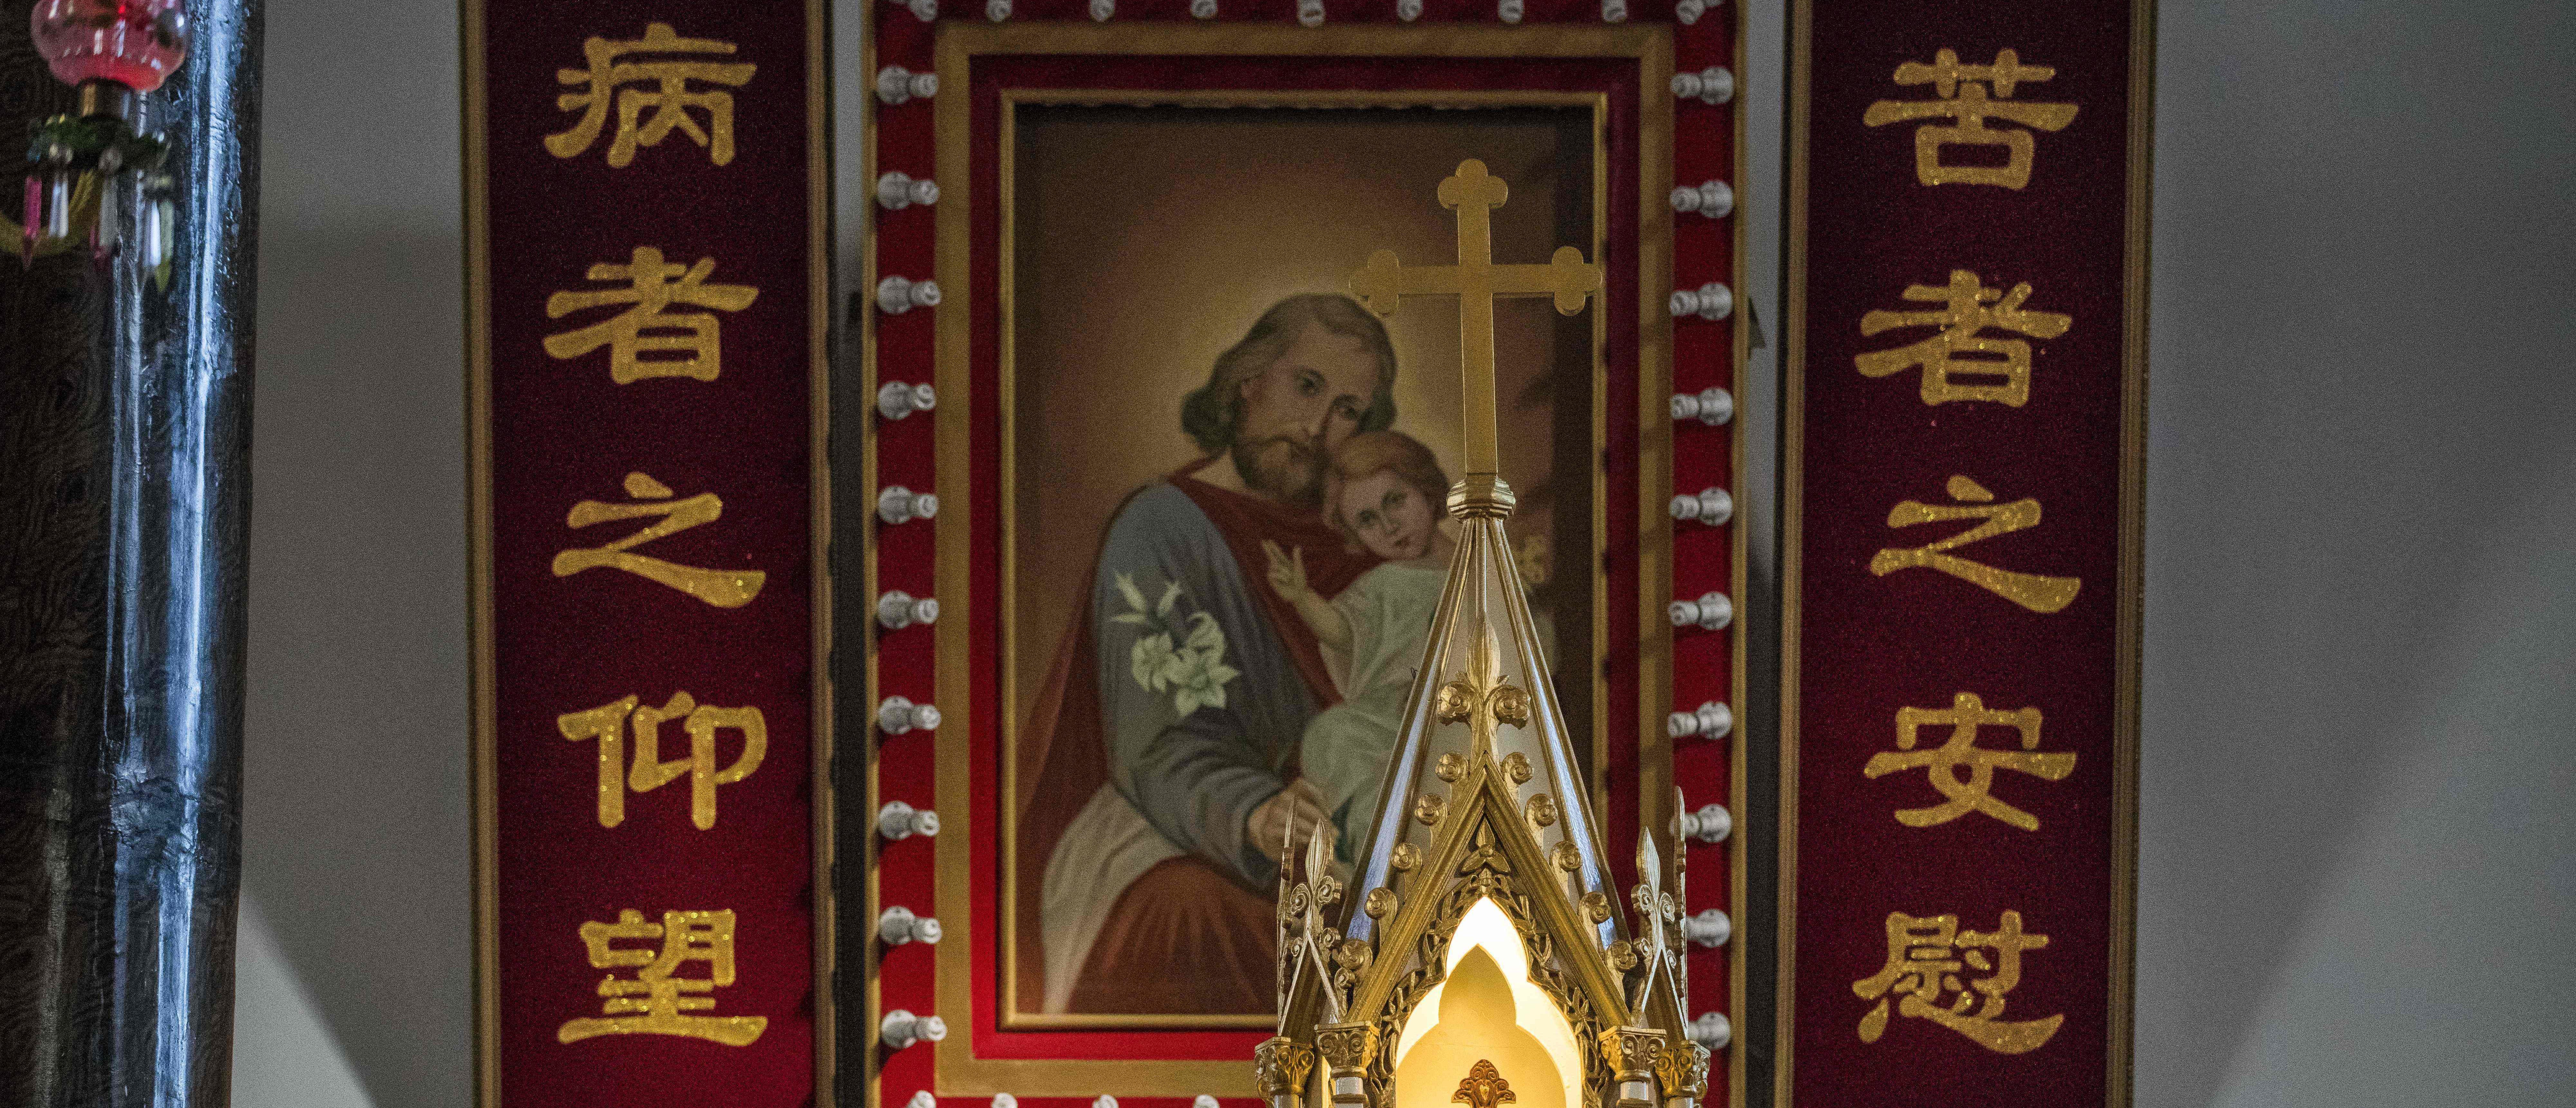 A cross with Jesus (front) and a painting with Joseph and Jesus (back) are seen inside St. Joseph's church, also known as Wangfujing church, in Beijing on January 25, 2018. [NICOLAS ASFOURI/AFP via Getty Images]